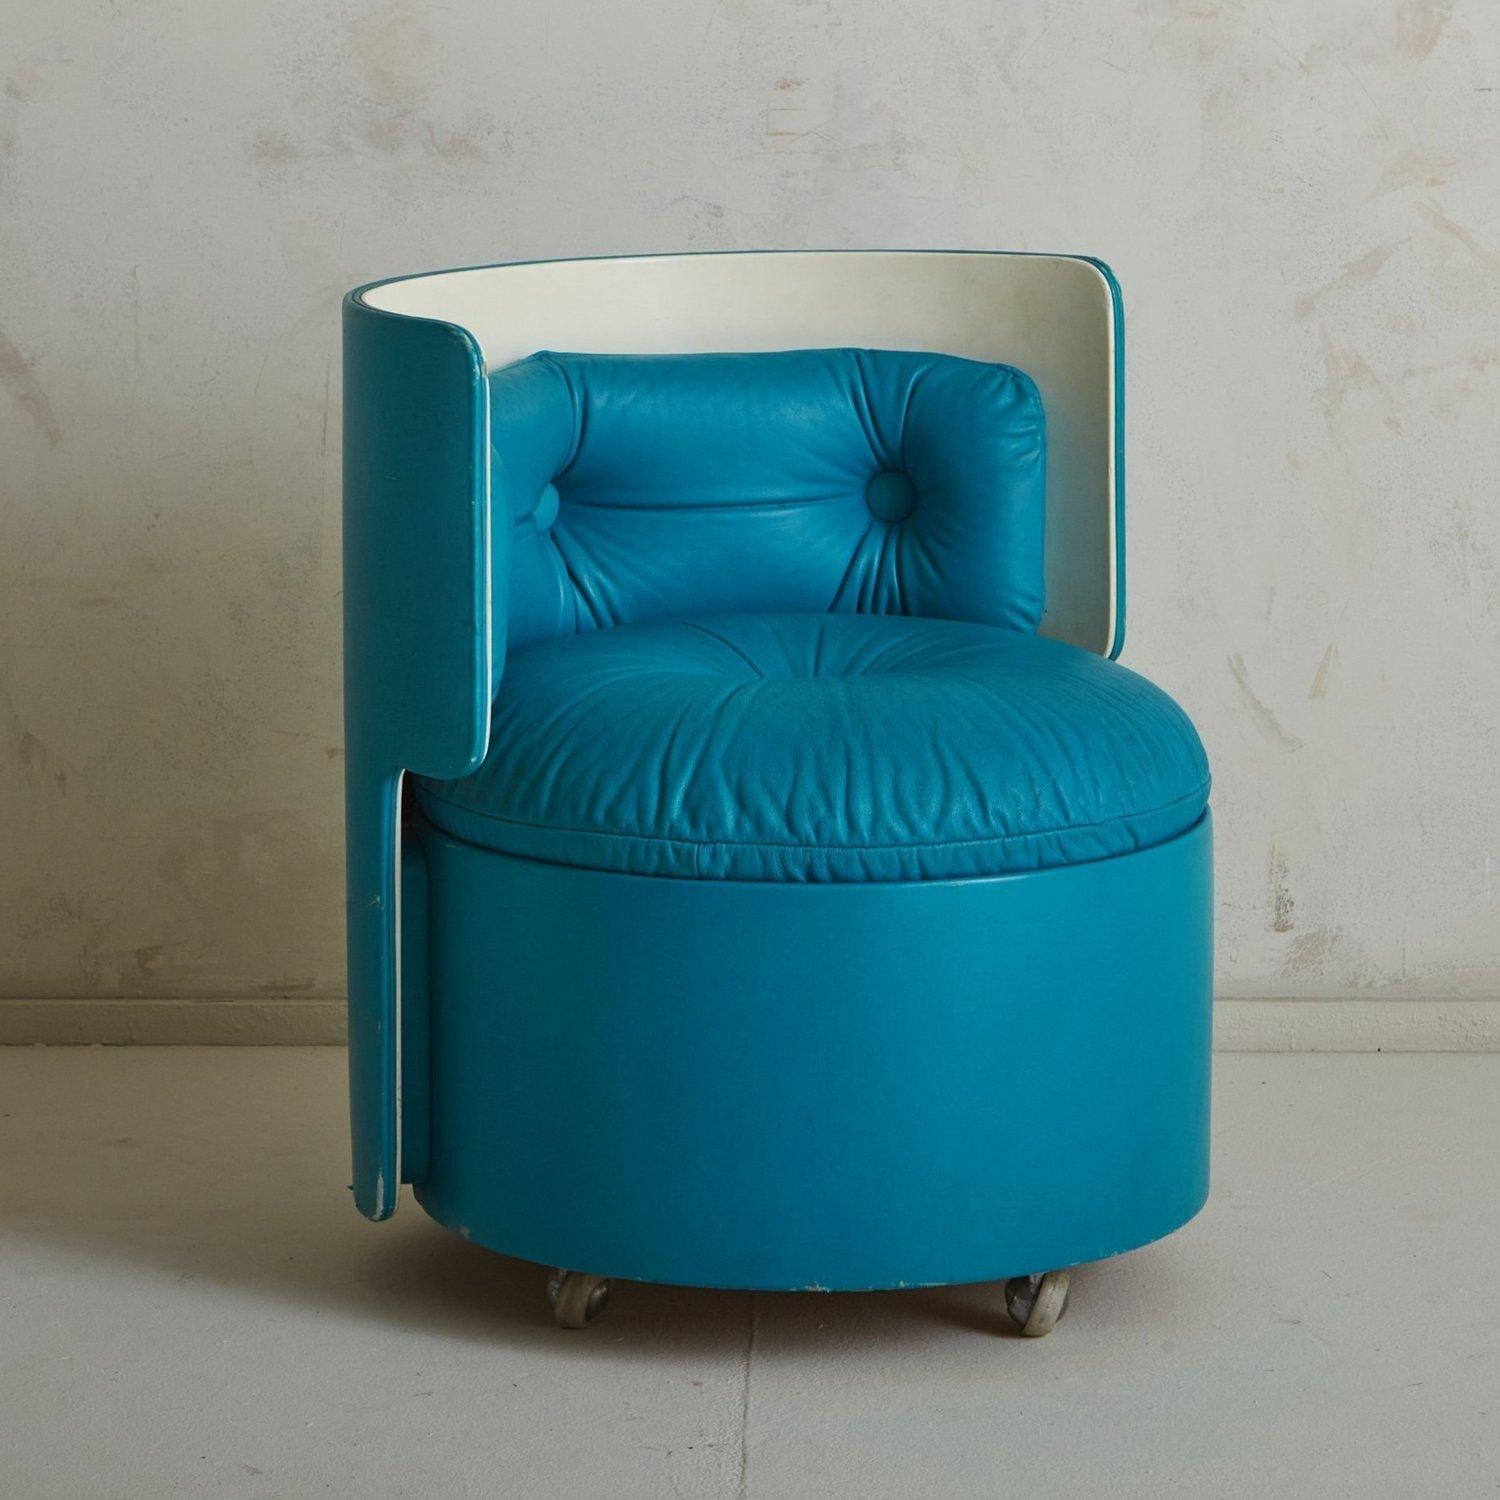 An Italian ‘Dilly Dally’ chair designed by Luigi Massoni for Poltrona Frau in 1968. This chair is part of a modular vanity set, in which the chair nests into the table creating a cylinder. It has a barrel frame clad in teal leather with a cream